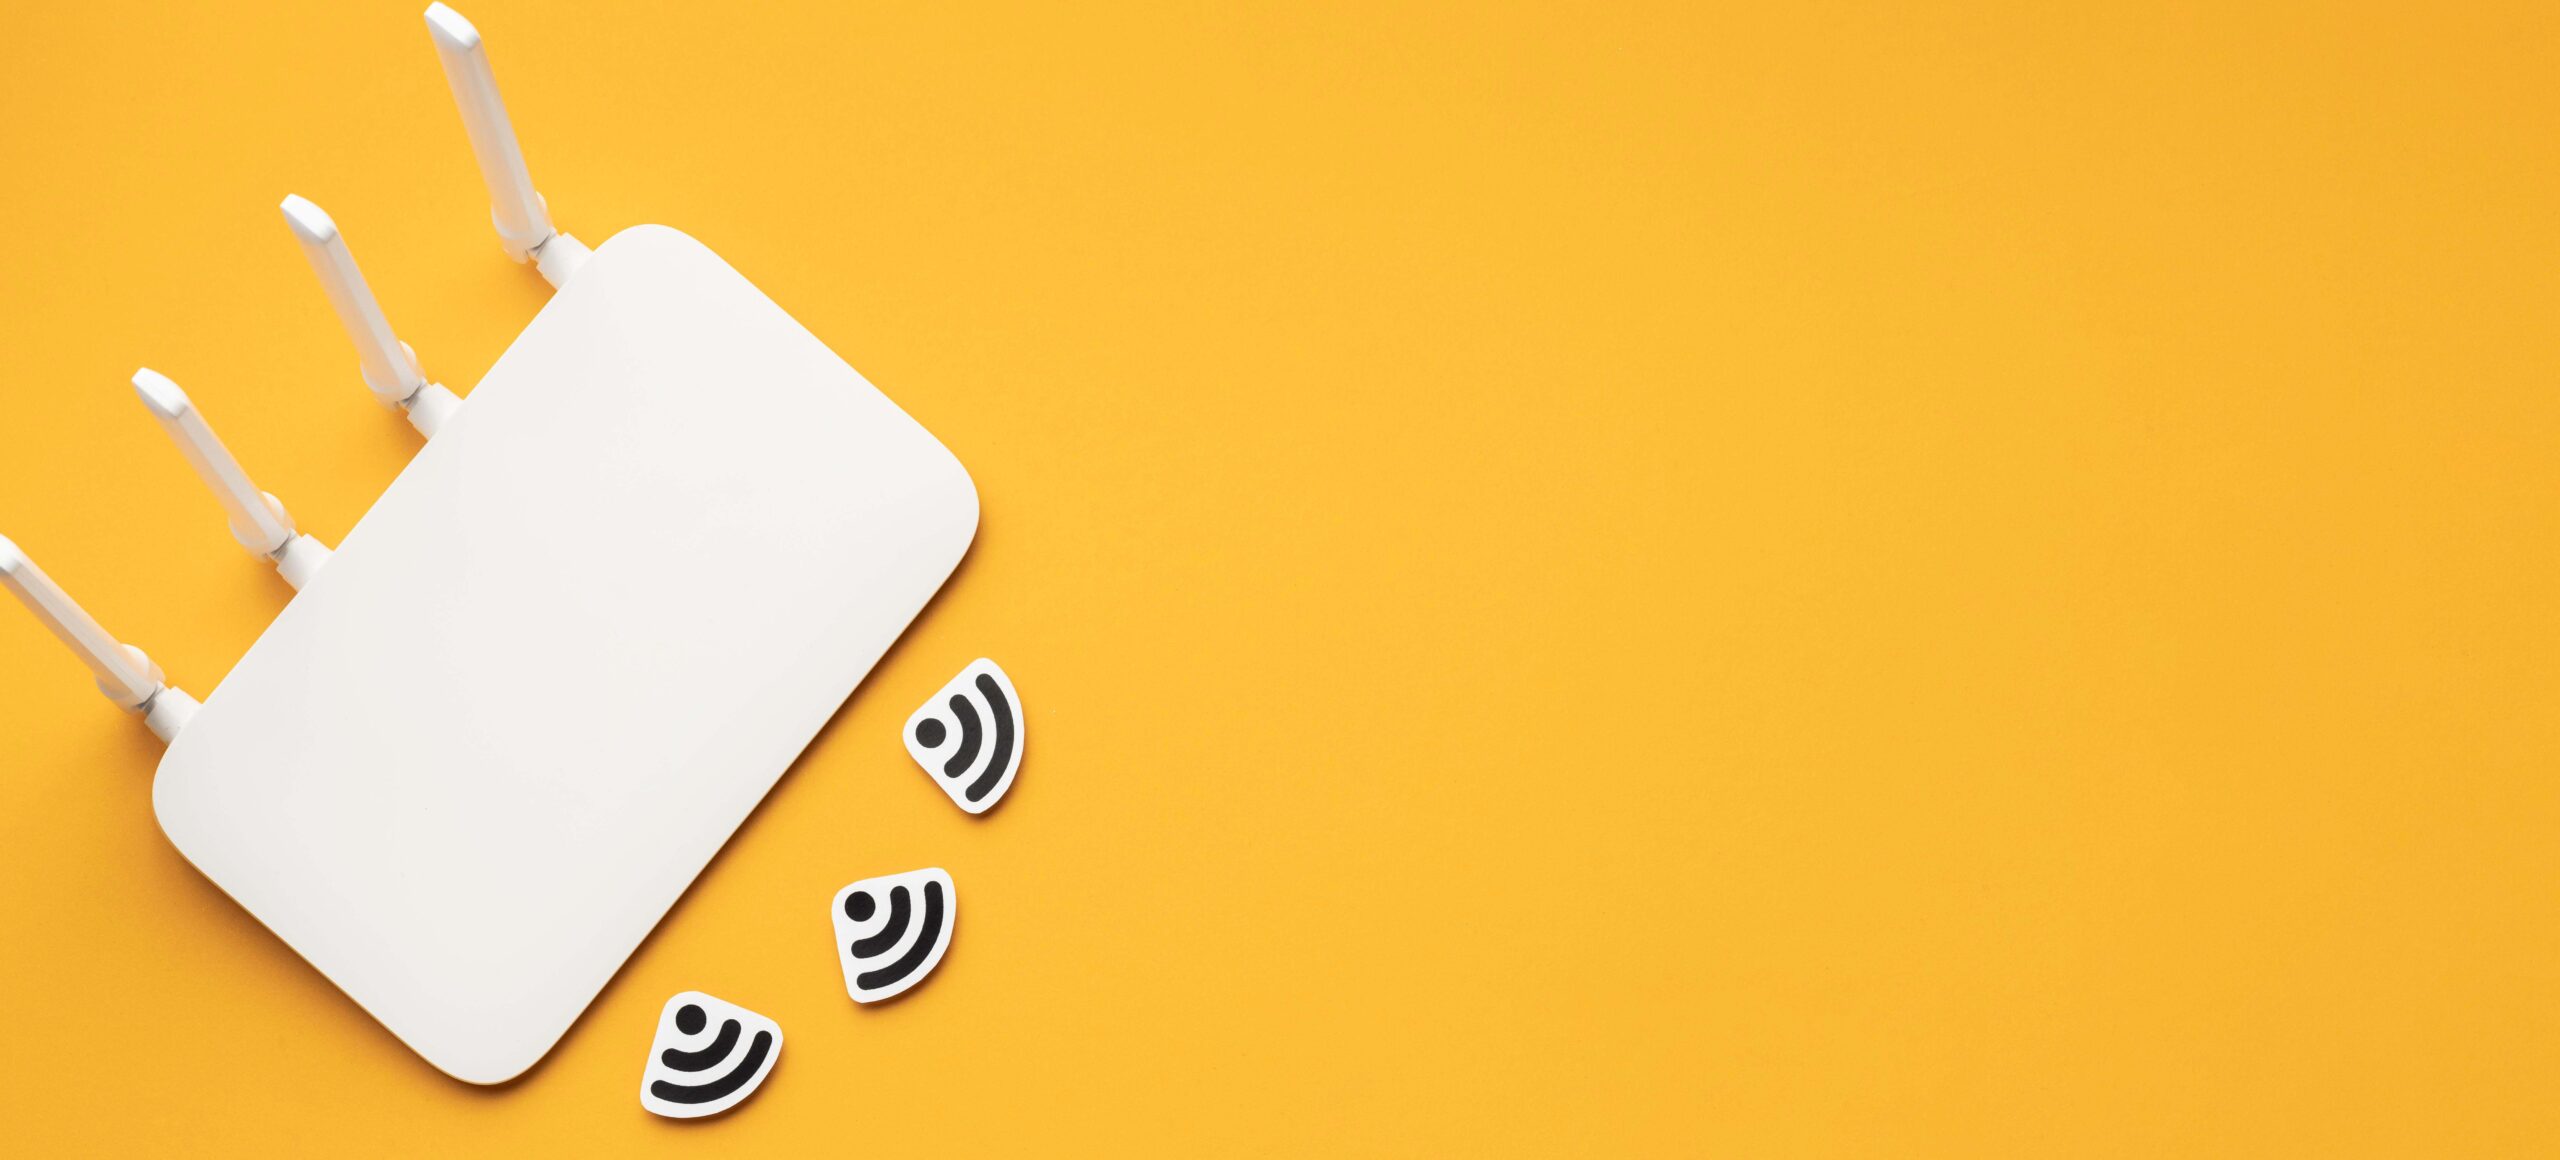 Overhead view of a white router with Wi-Fi symbols on a yellow surface.